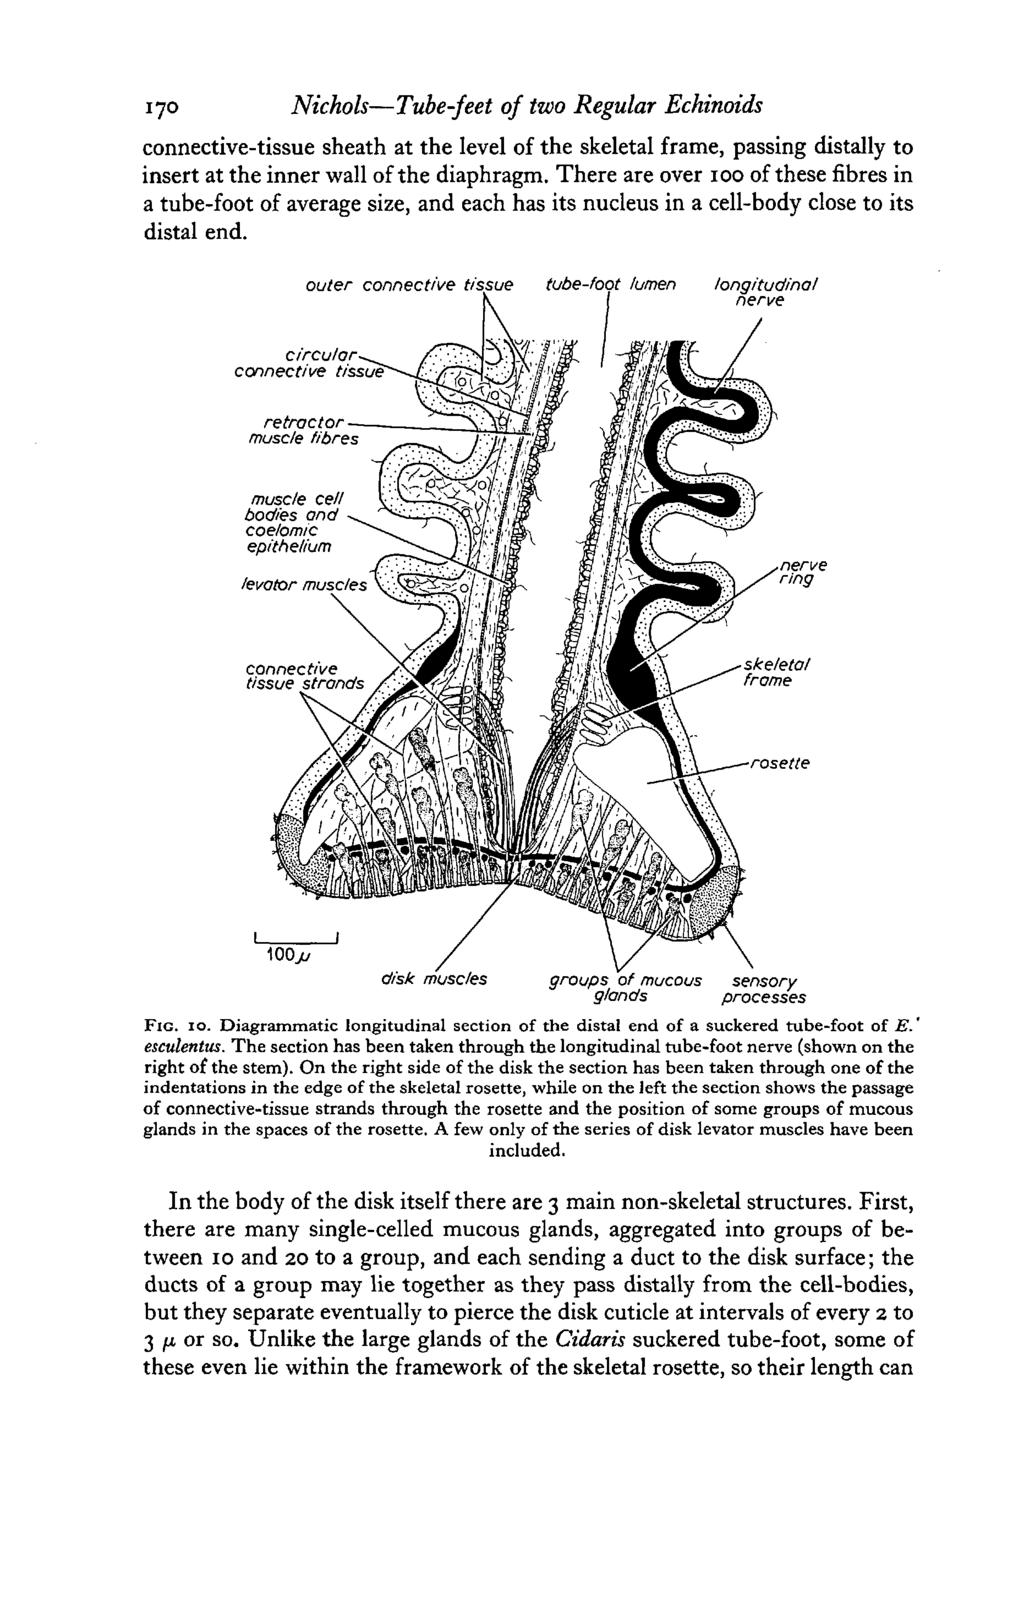 170 Nichols Tube-feet of two Regular Echinoids connective-tissue sheath at the level of the skeletal frame, passing distally to insert at the inner wall of the diaphragm.